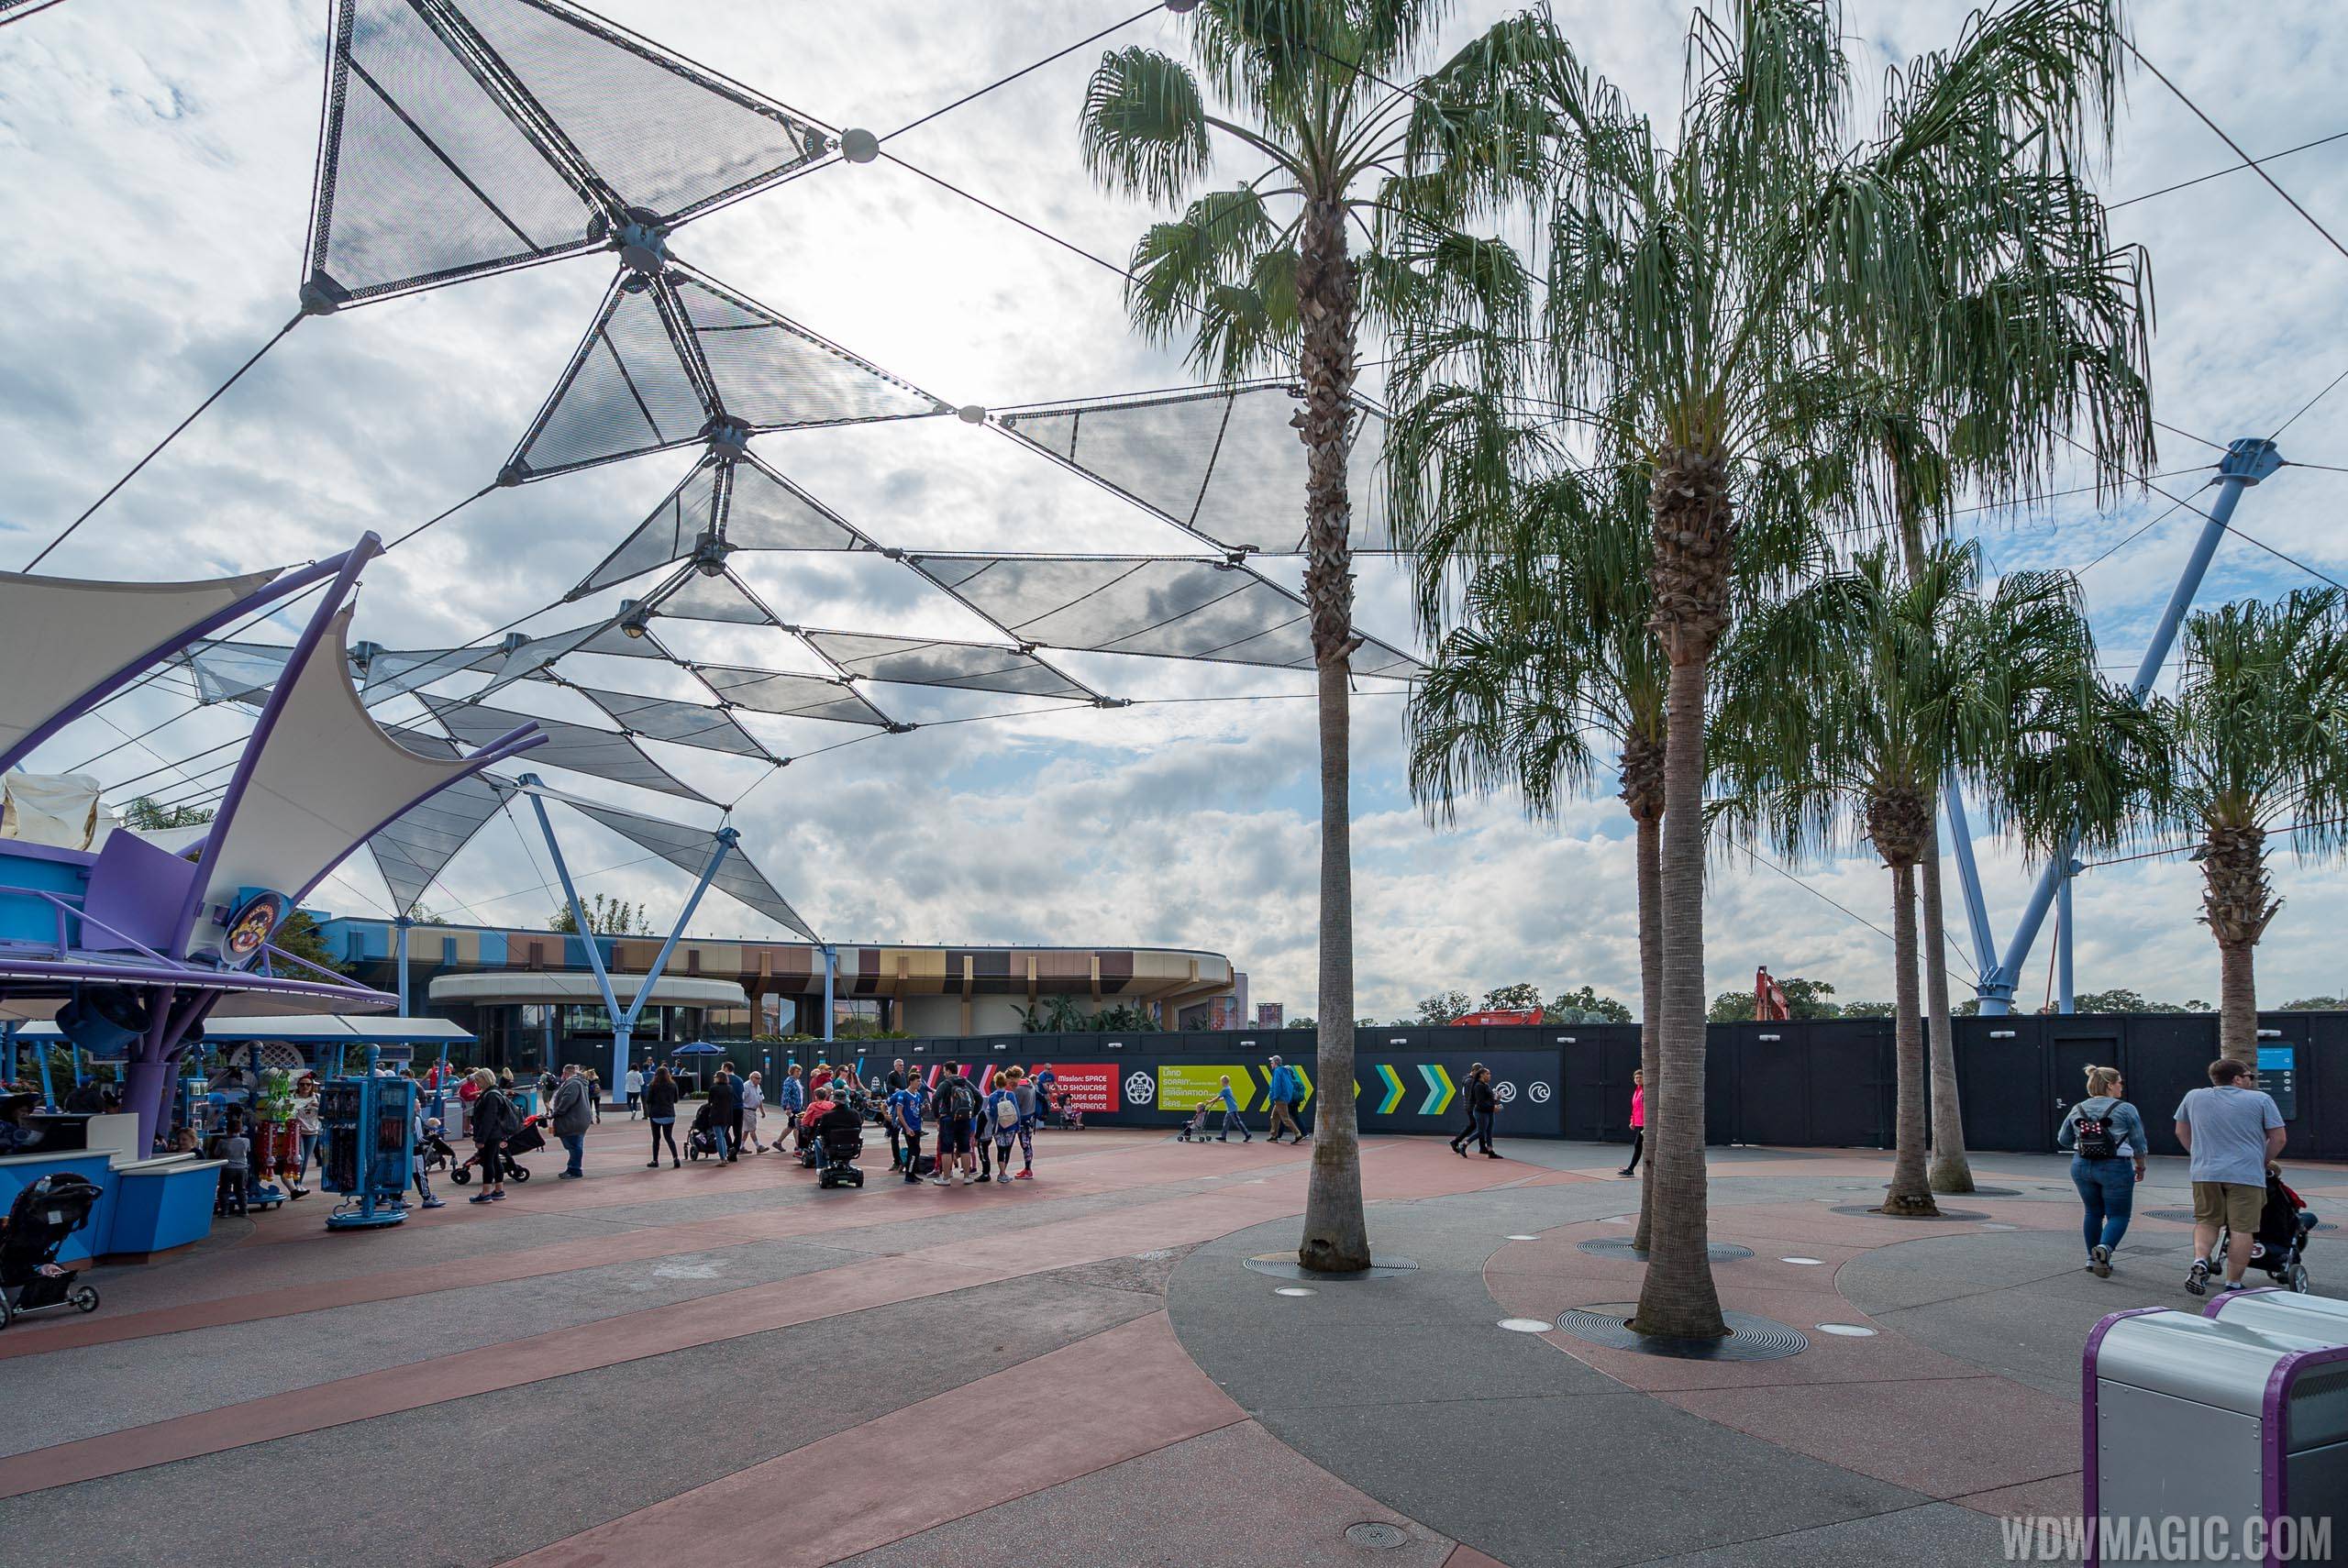 PHOTOS - Latest construction wall changes in Epcot's Future World